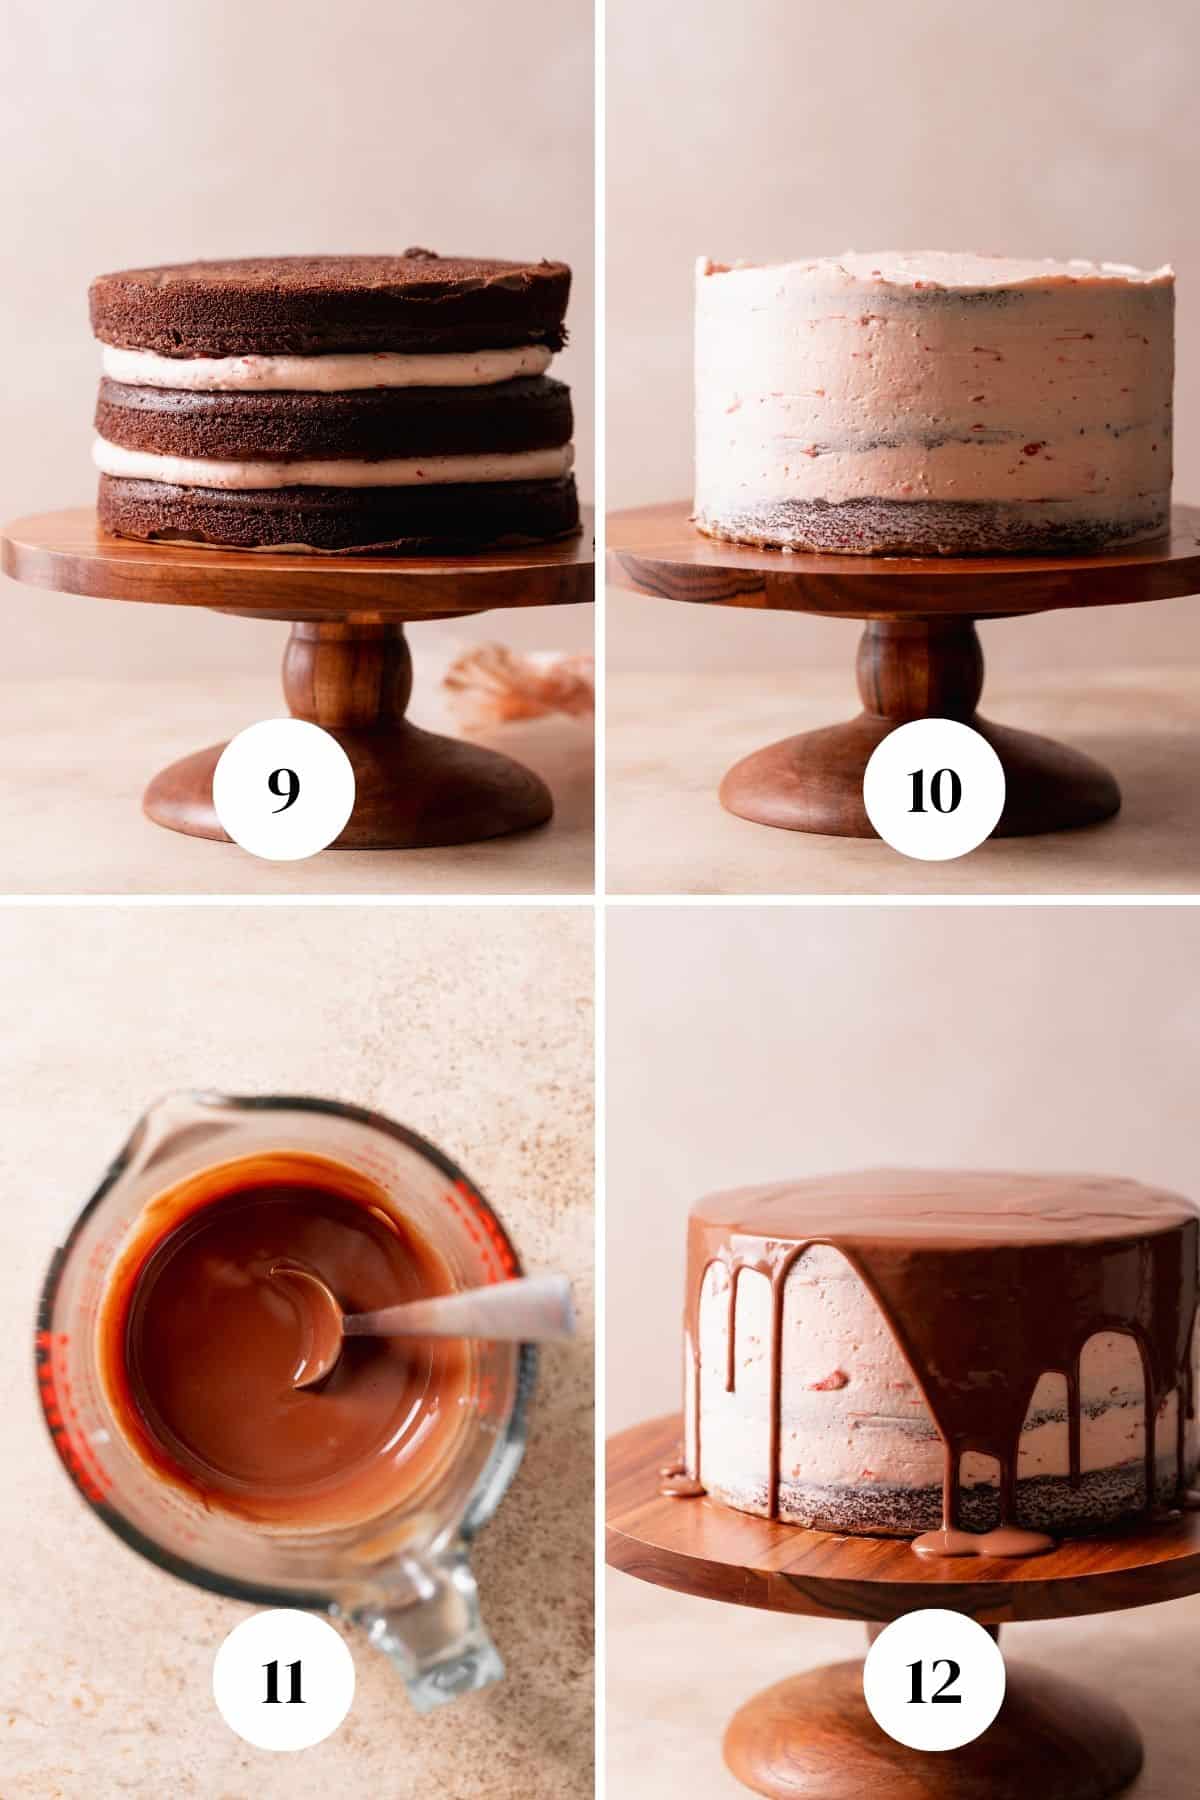 A process collage of the steps for decorating the chocolate cake with ganache and strawberries.